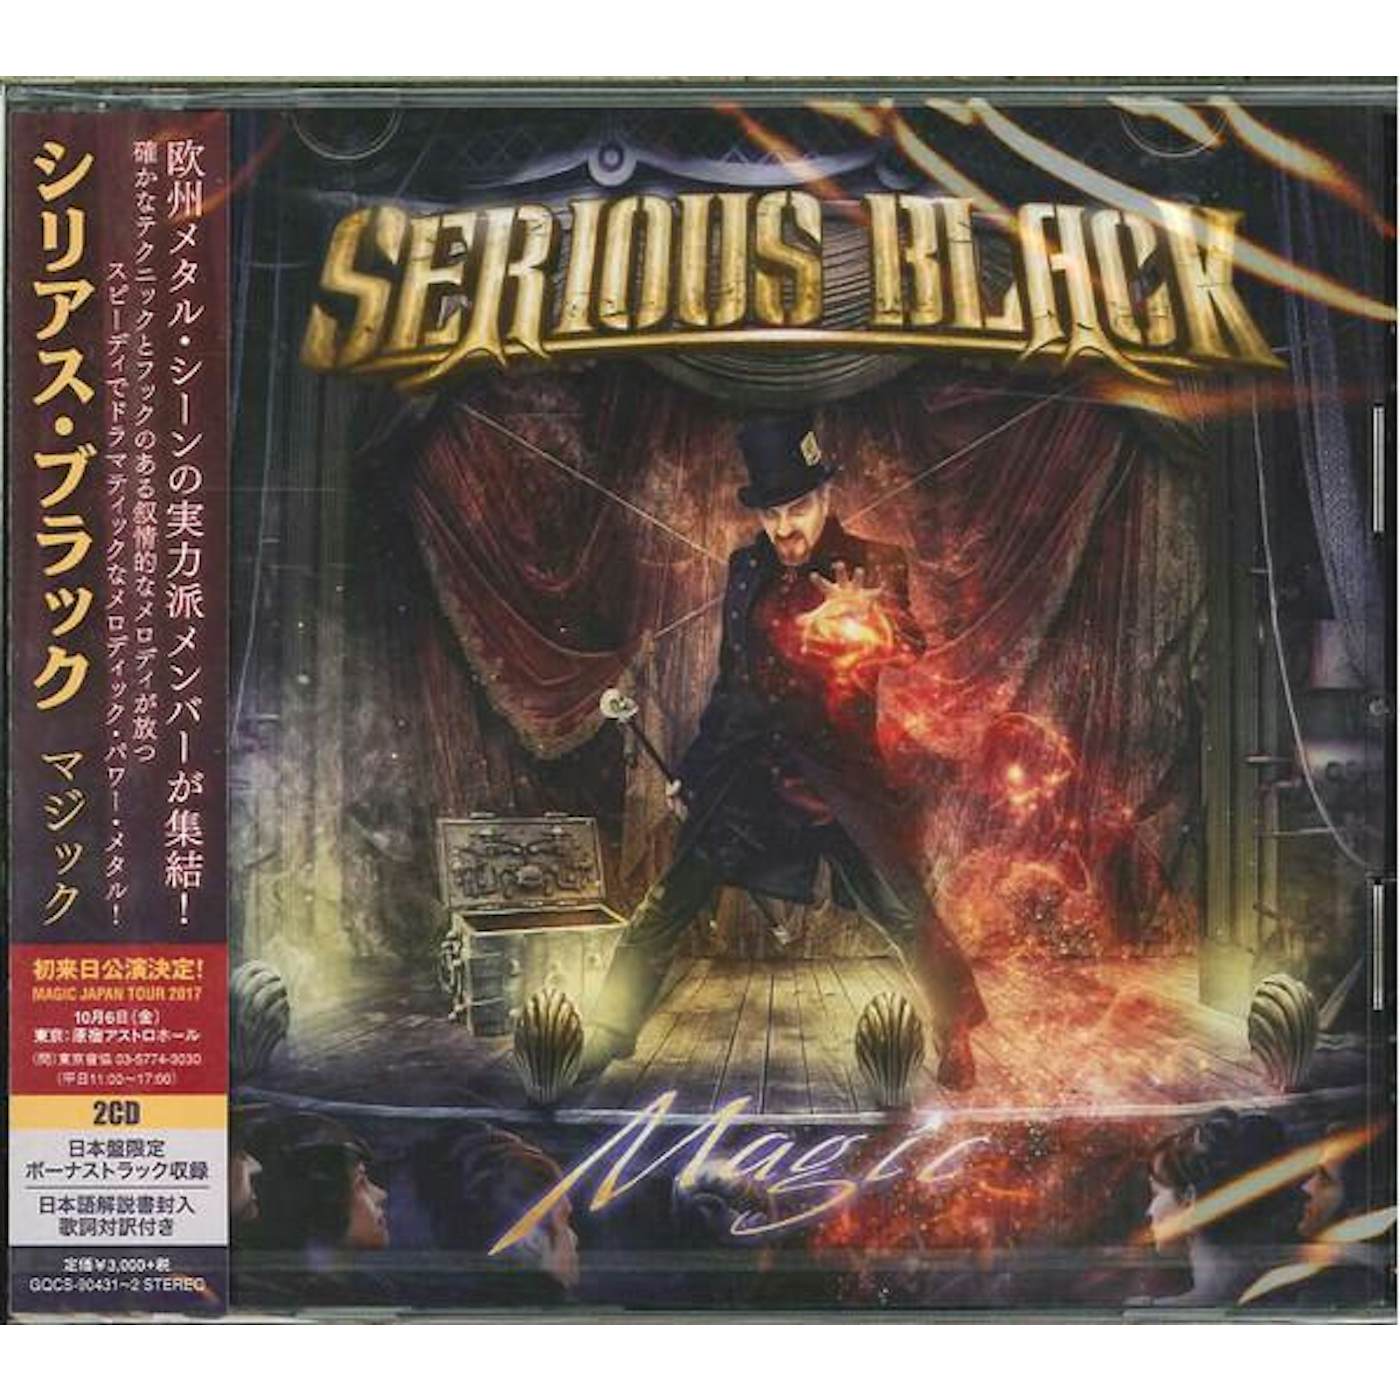 Serious Black MAGIC (LIMITED/BOOKLET) CD